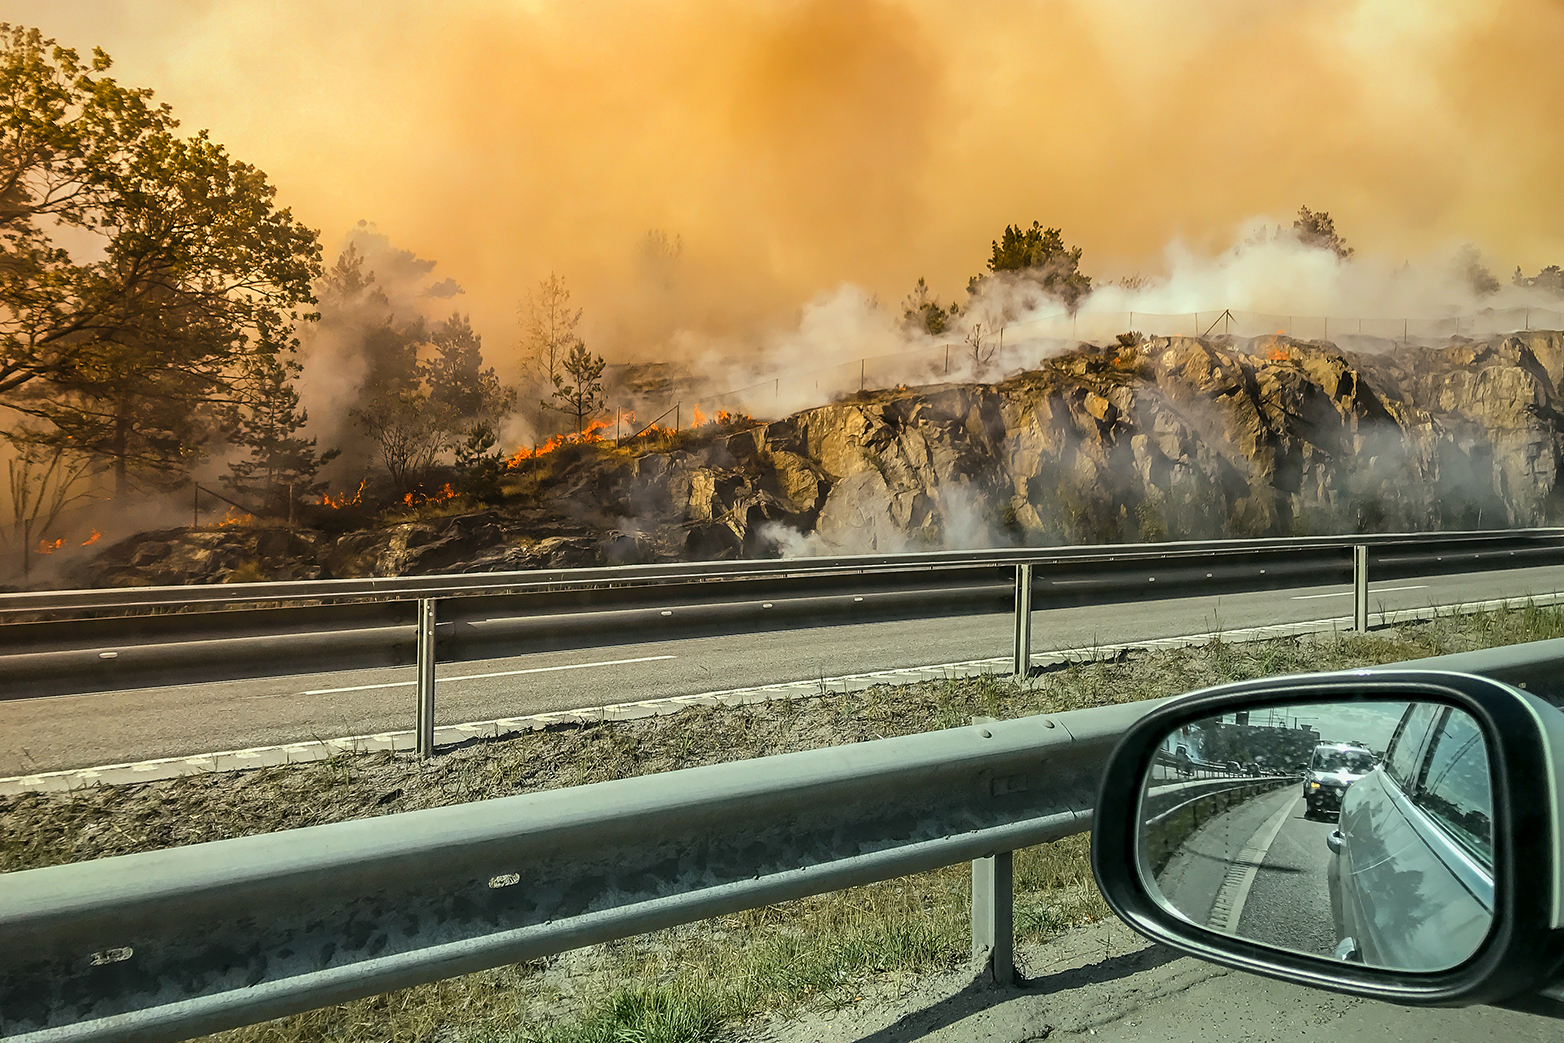 In Sweden, forests and peatbogs were burning. ( Photograph: Colourbox )